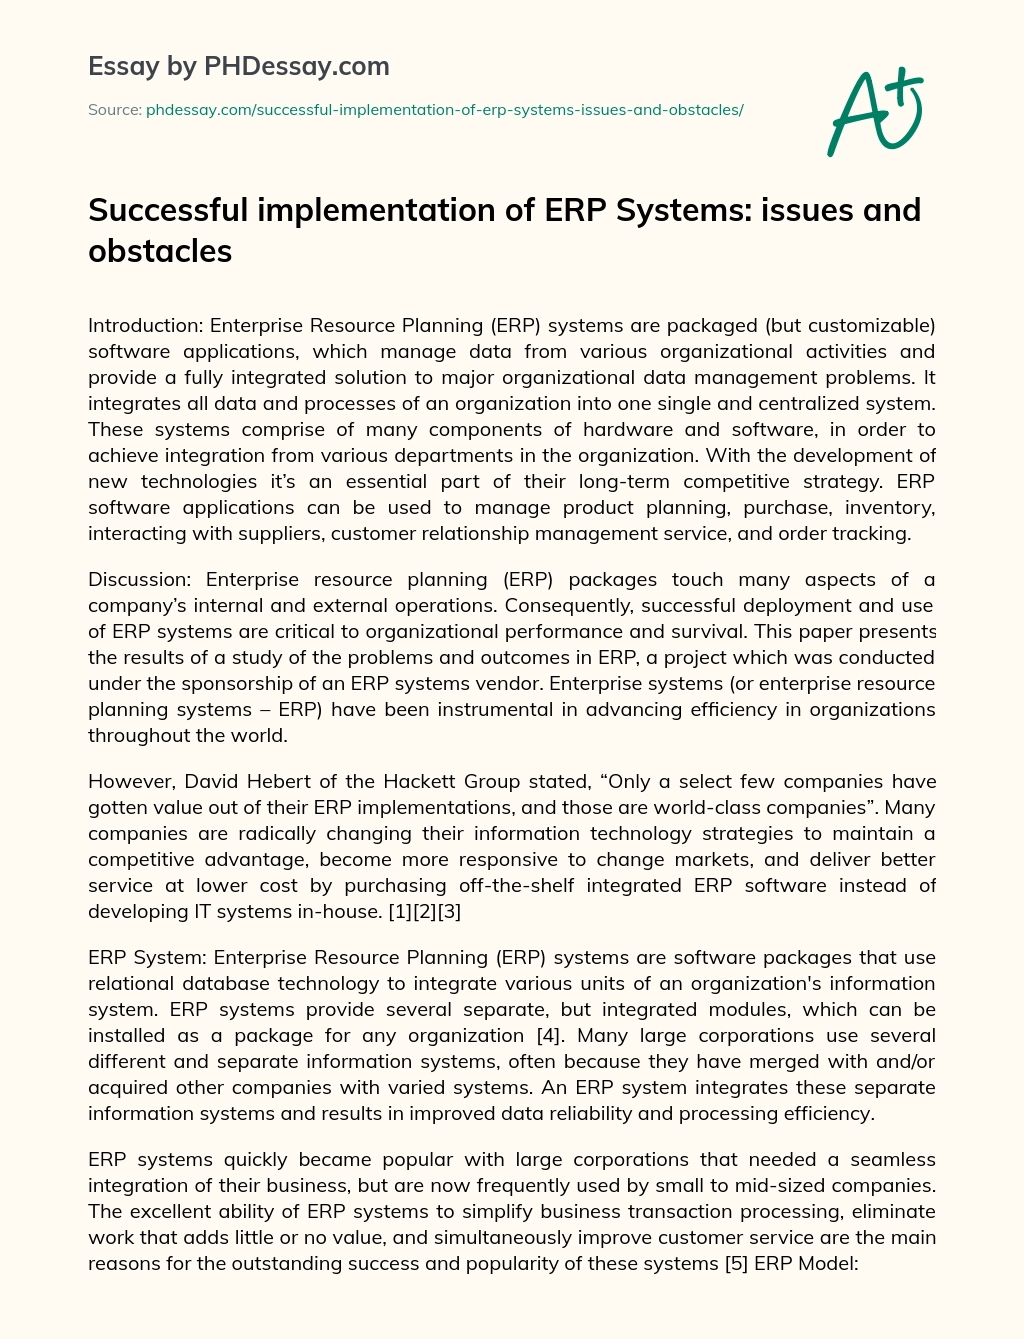 Successful implementation of ERP Systems: issues and obstacles essay